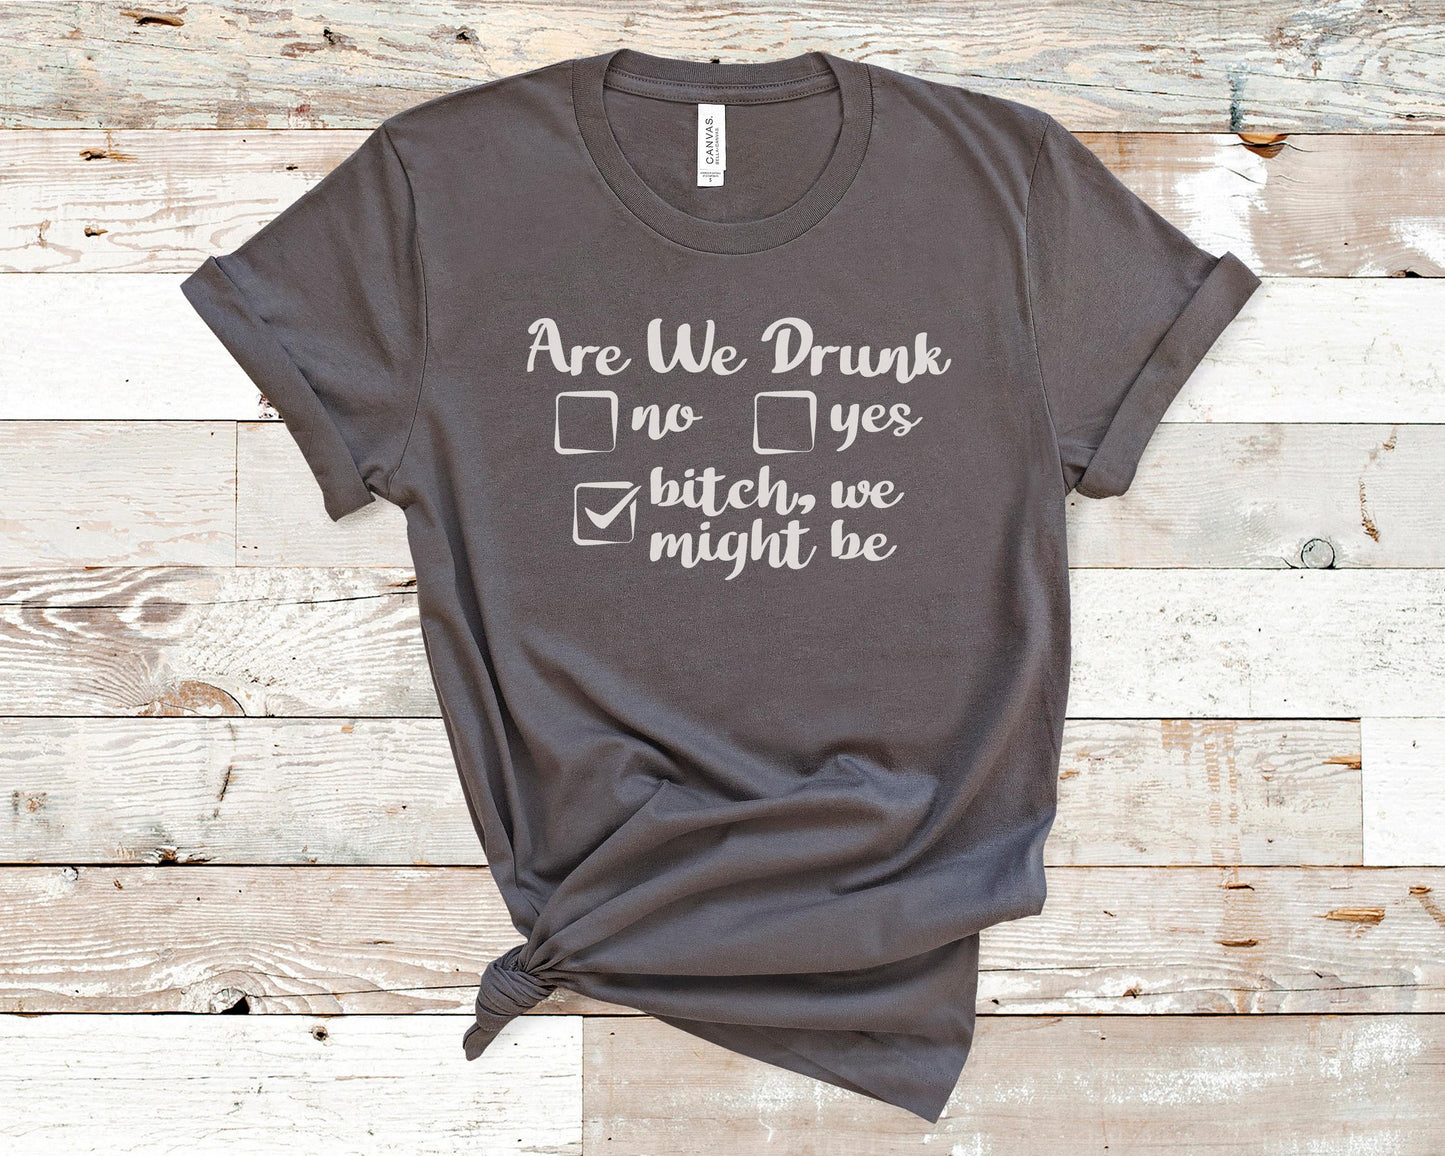 Are We Drunk? -  Wine Lovers